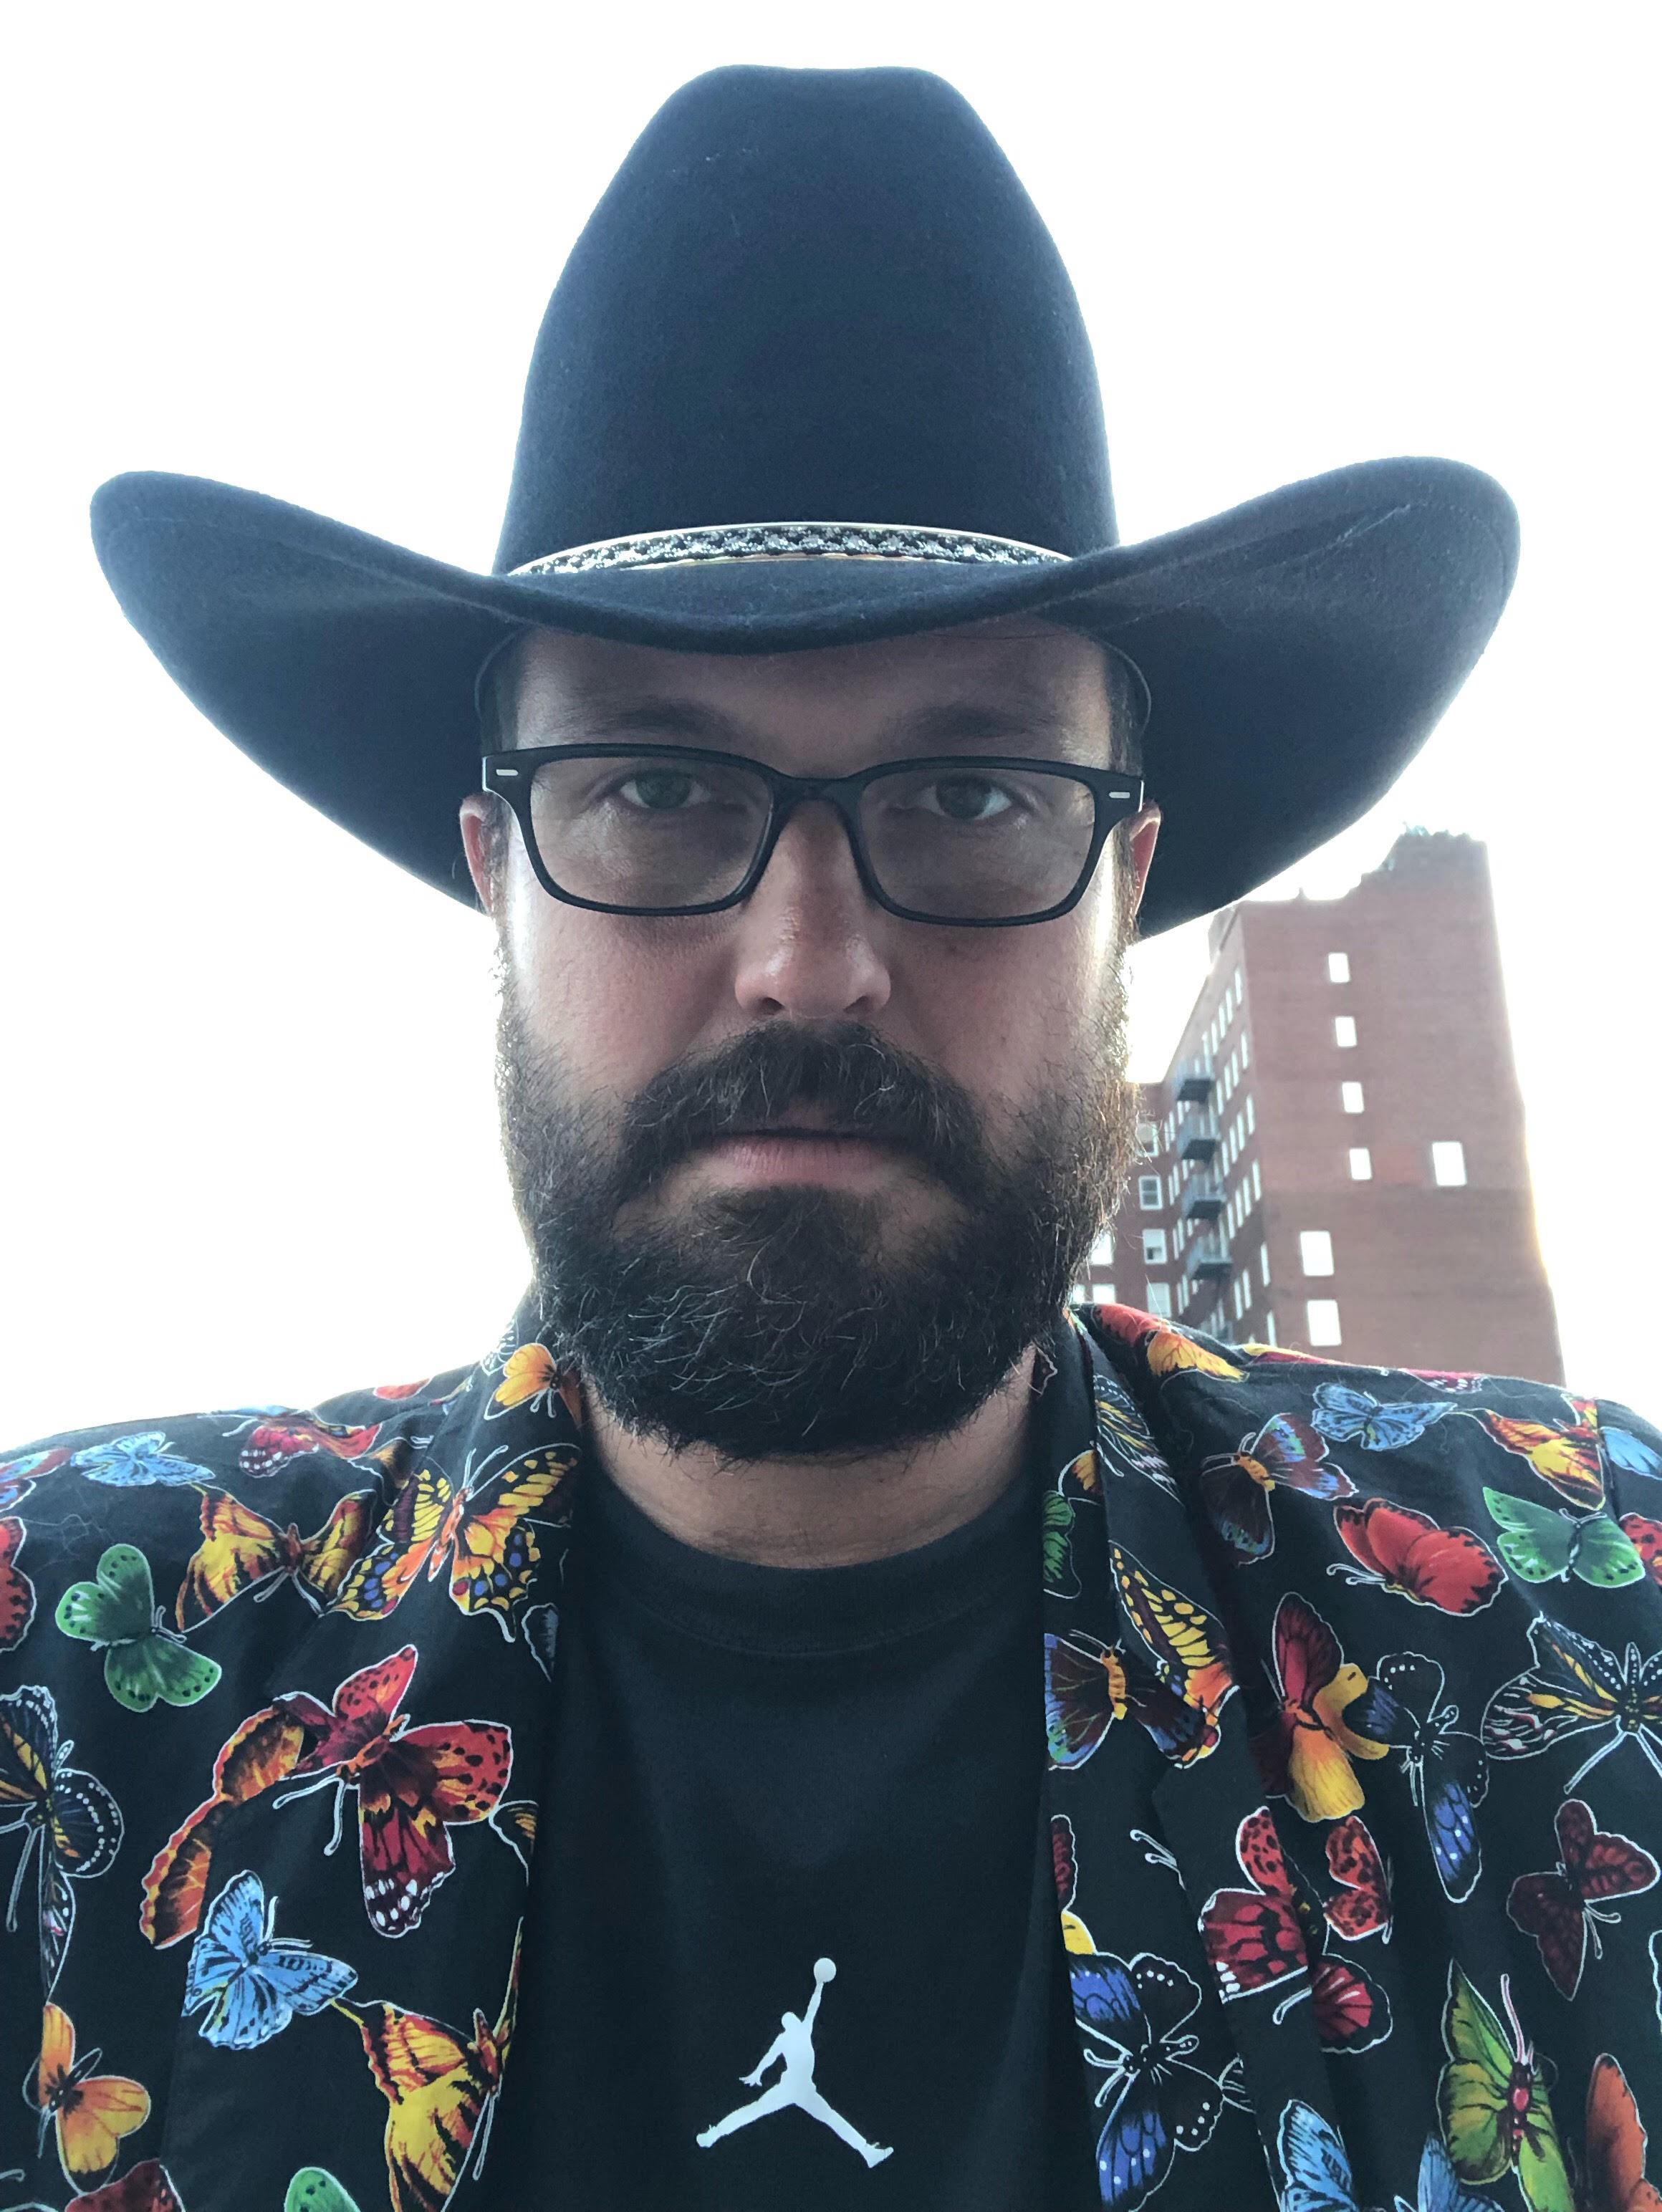 David wears a wide brimmed hat, has black framed glasses, and sports a full beard. He is wearing button up with a colorful assortment of butterflies on top of a tshirt with the air jordan logo.